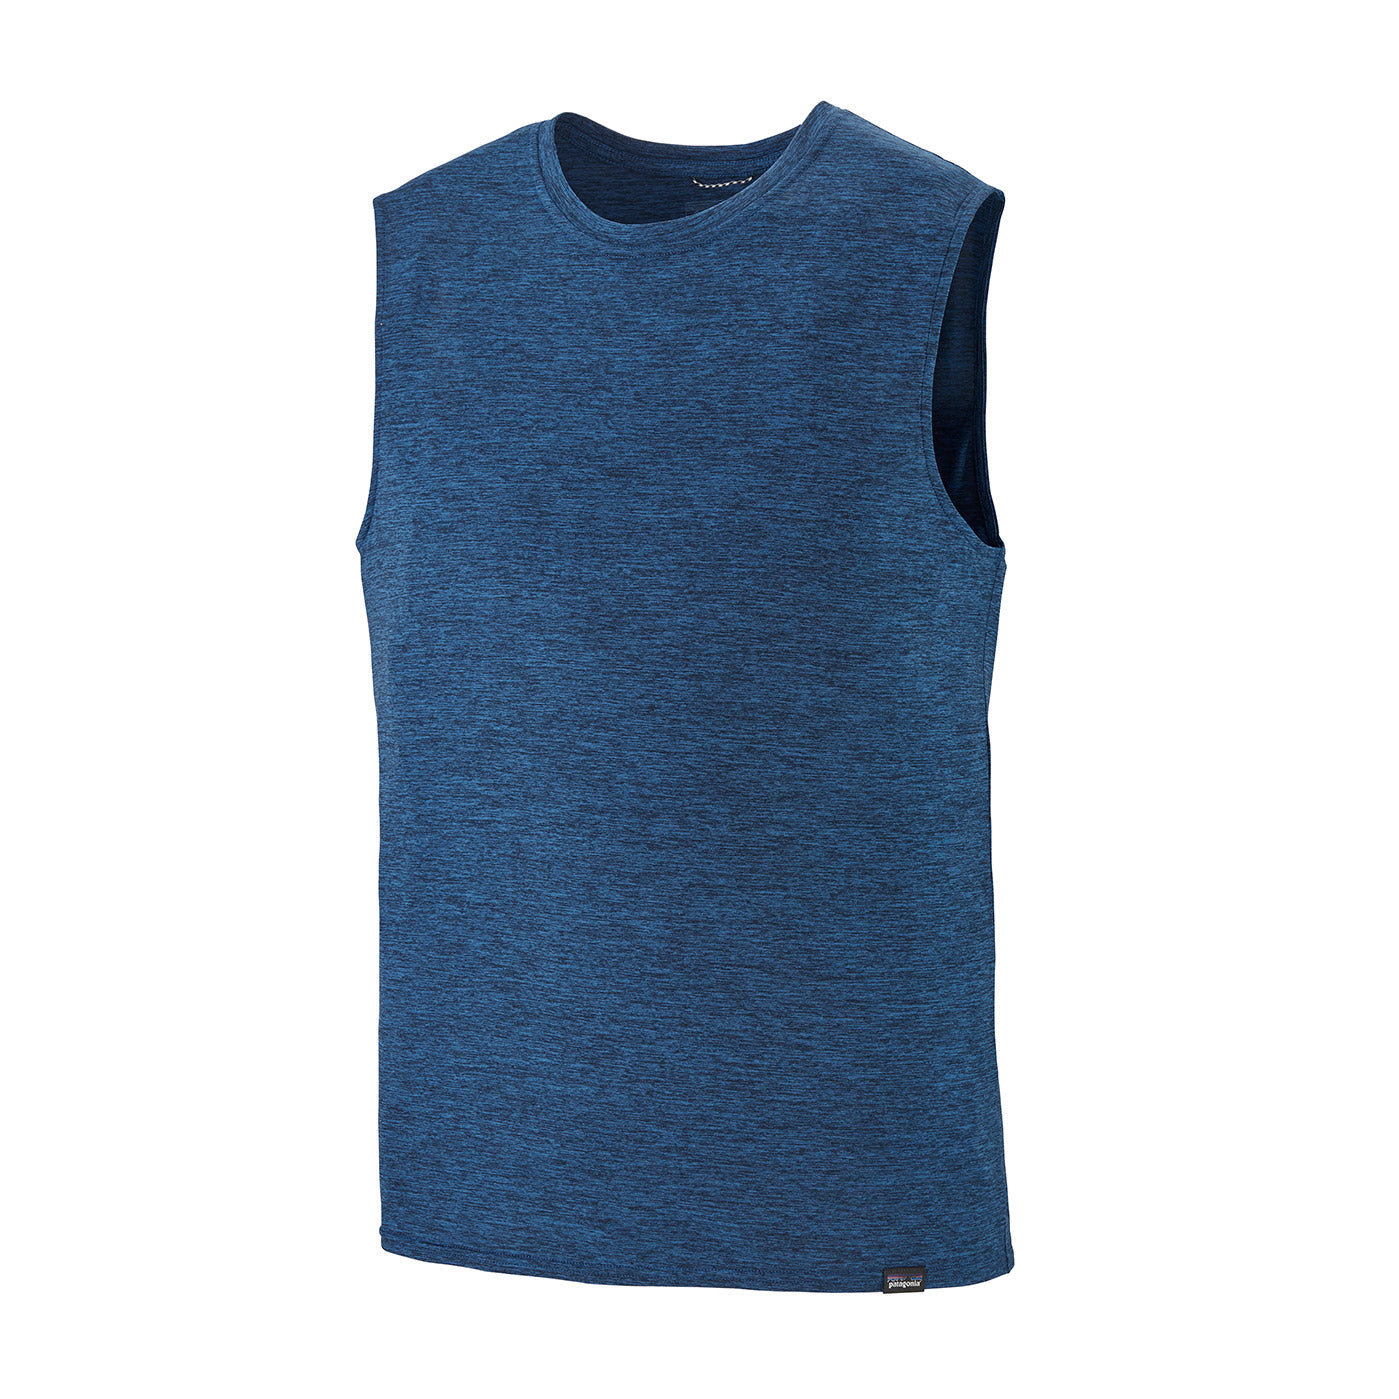 patagonia mens capilene cool daily tank in viking blue - navy blue x dye, front view